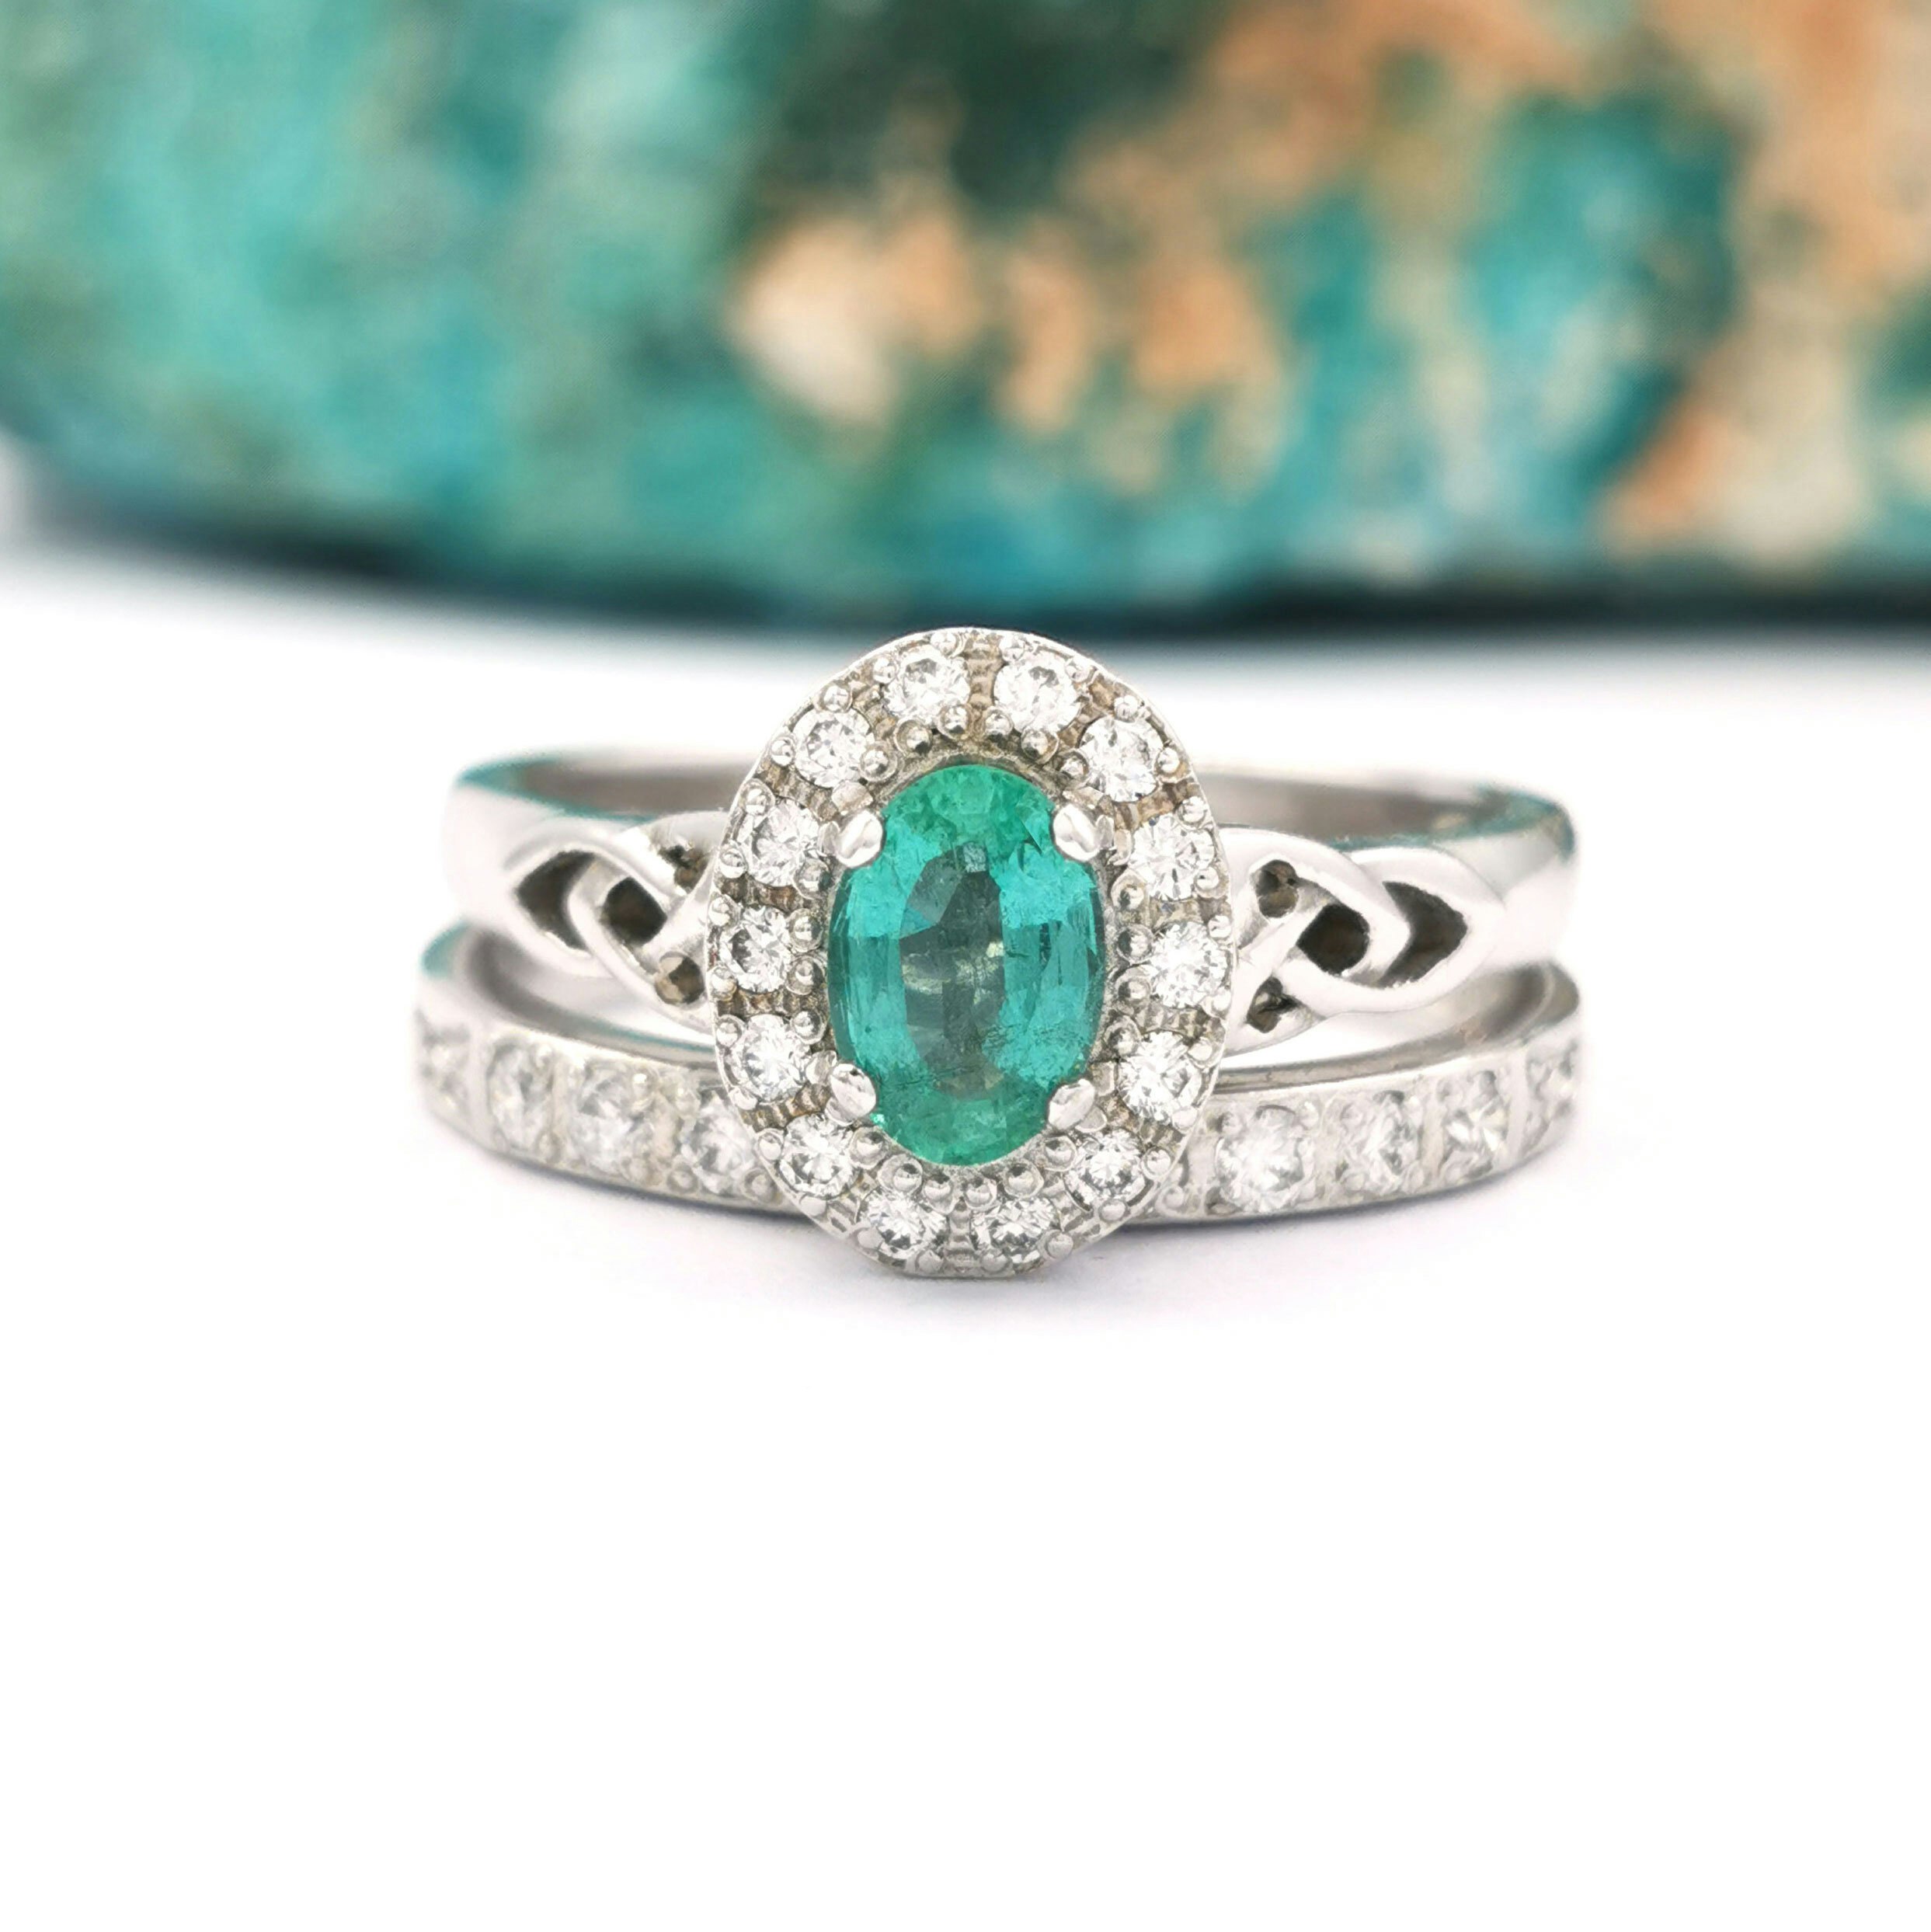 The Gorgeous Green Emerald is Trending – The Vintage Ring Company